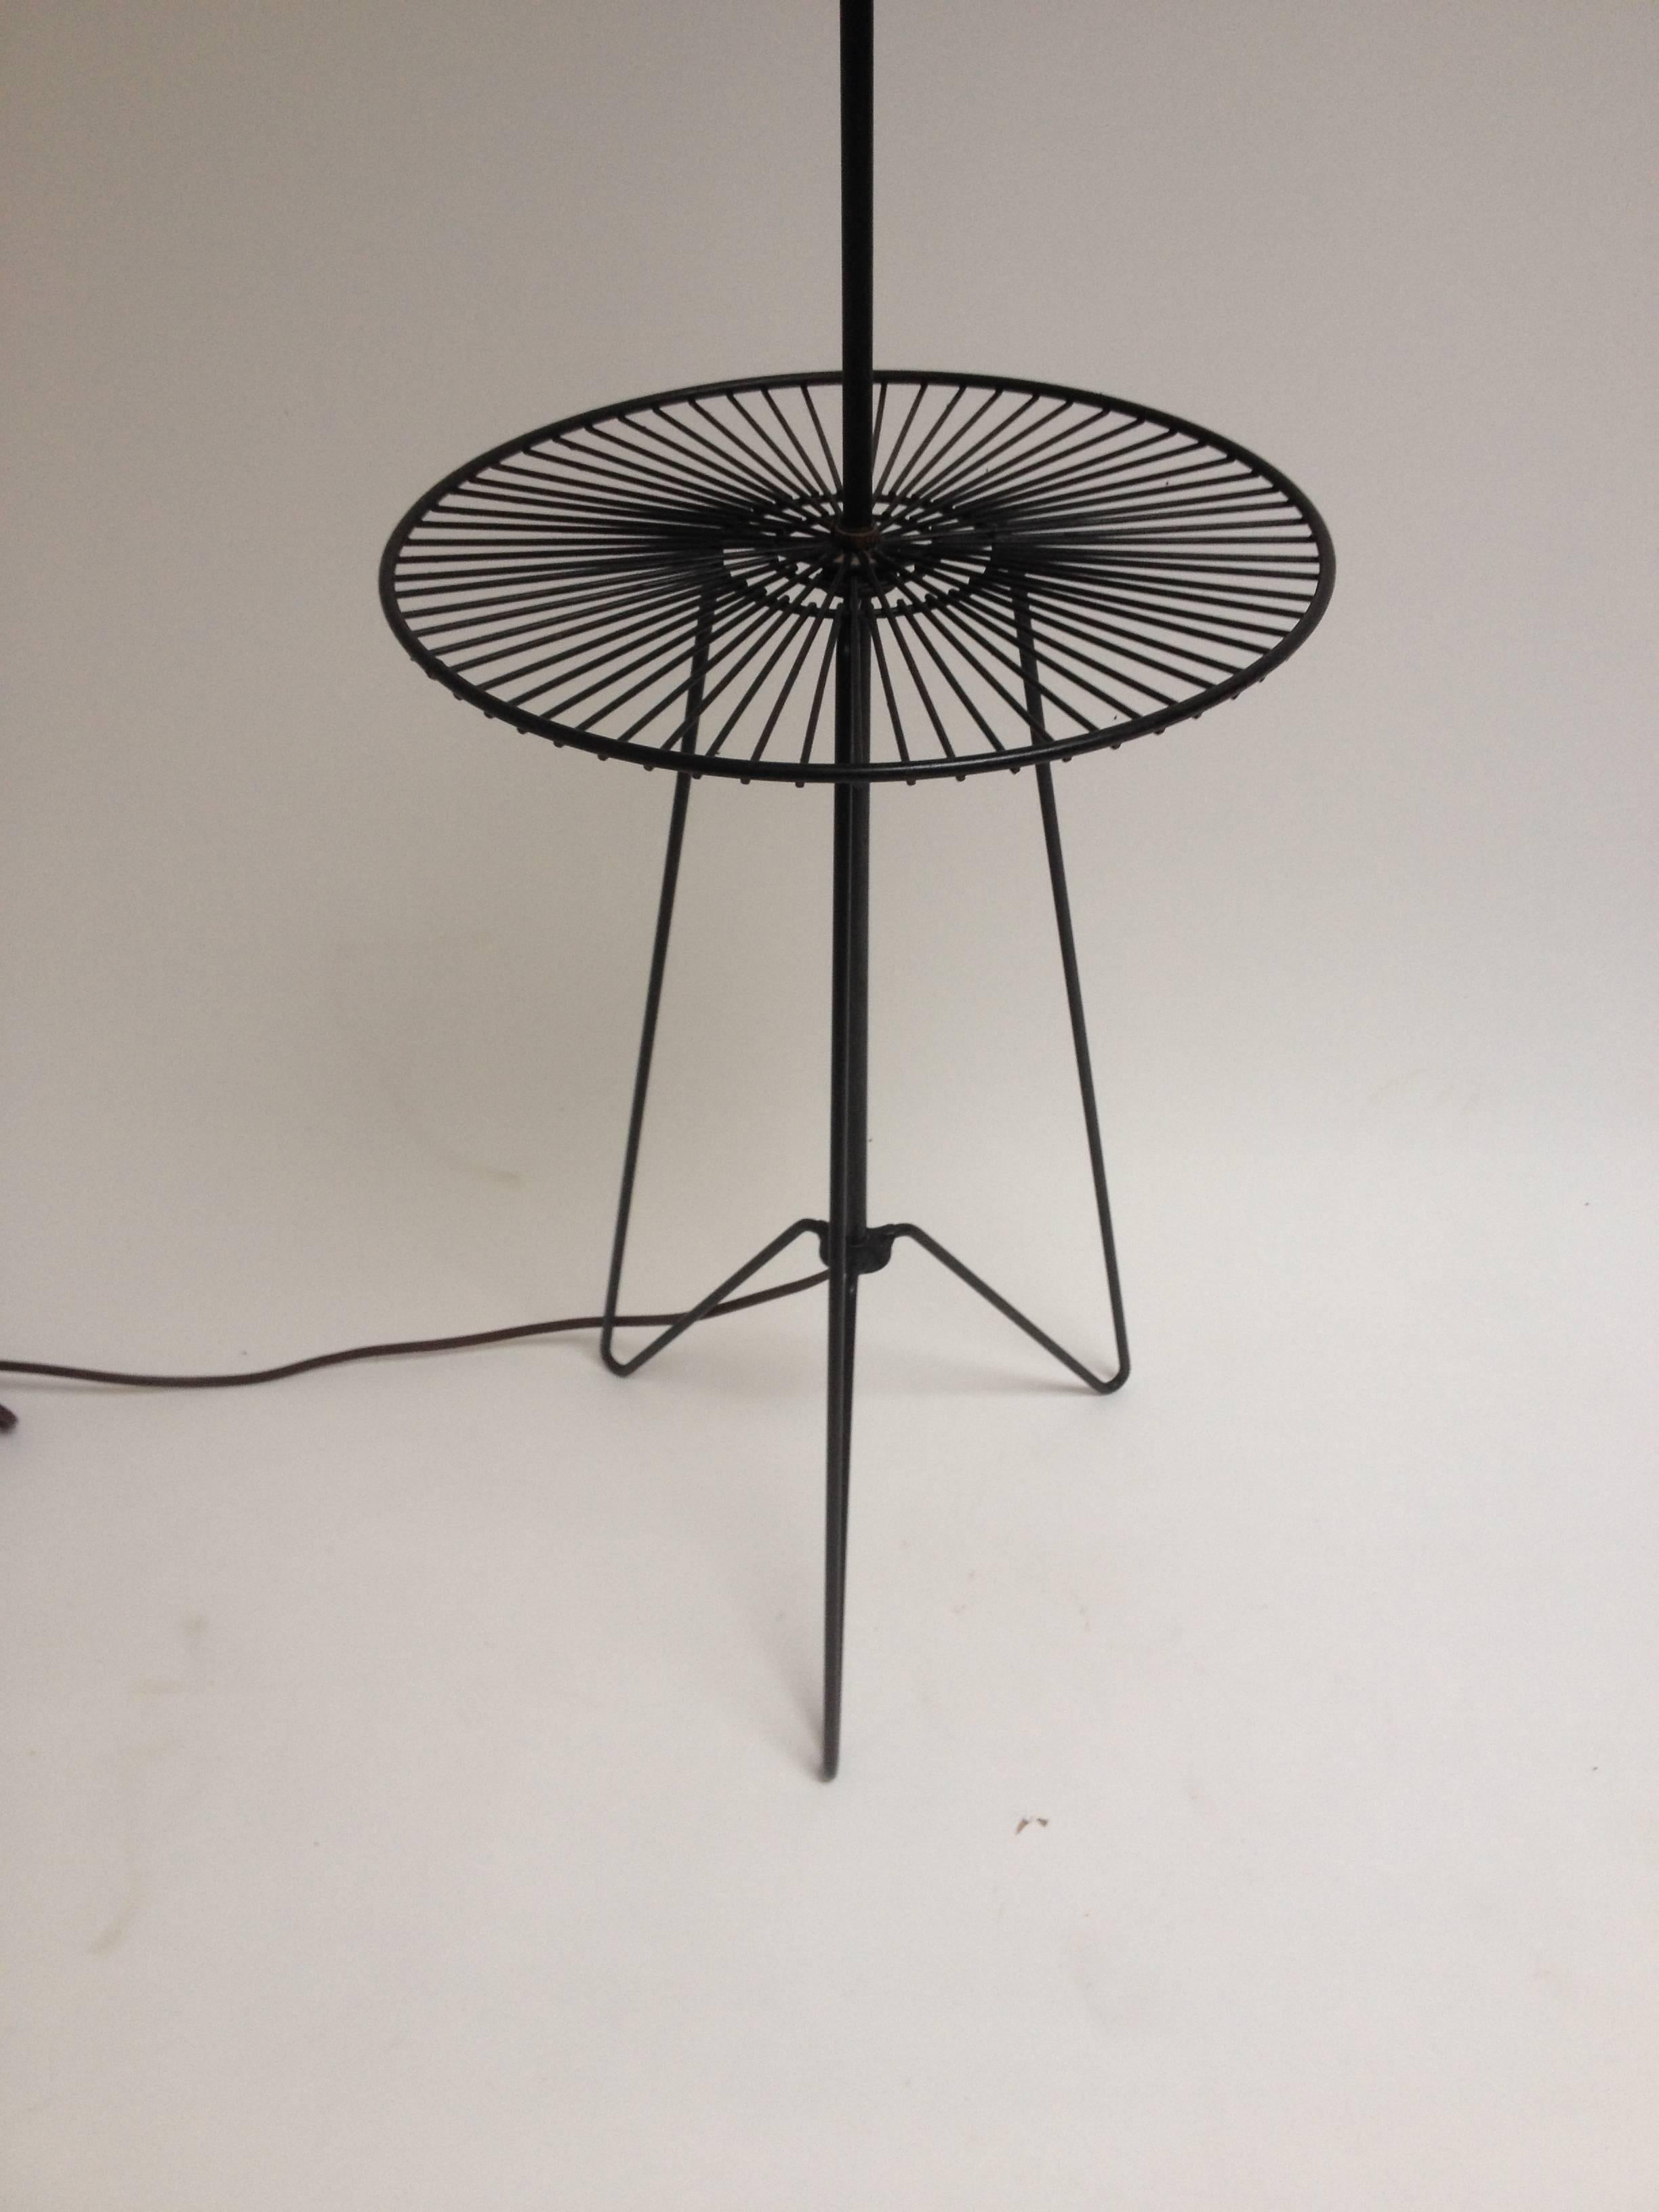 Fabulous 1950s Hairpin metal floor lamp with circular table – very good vintage condition. Made in Canada - sold without shade - a drum shade would look fabulous 